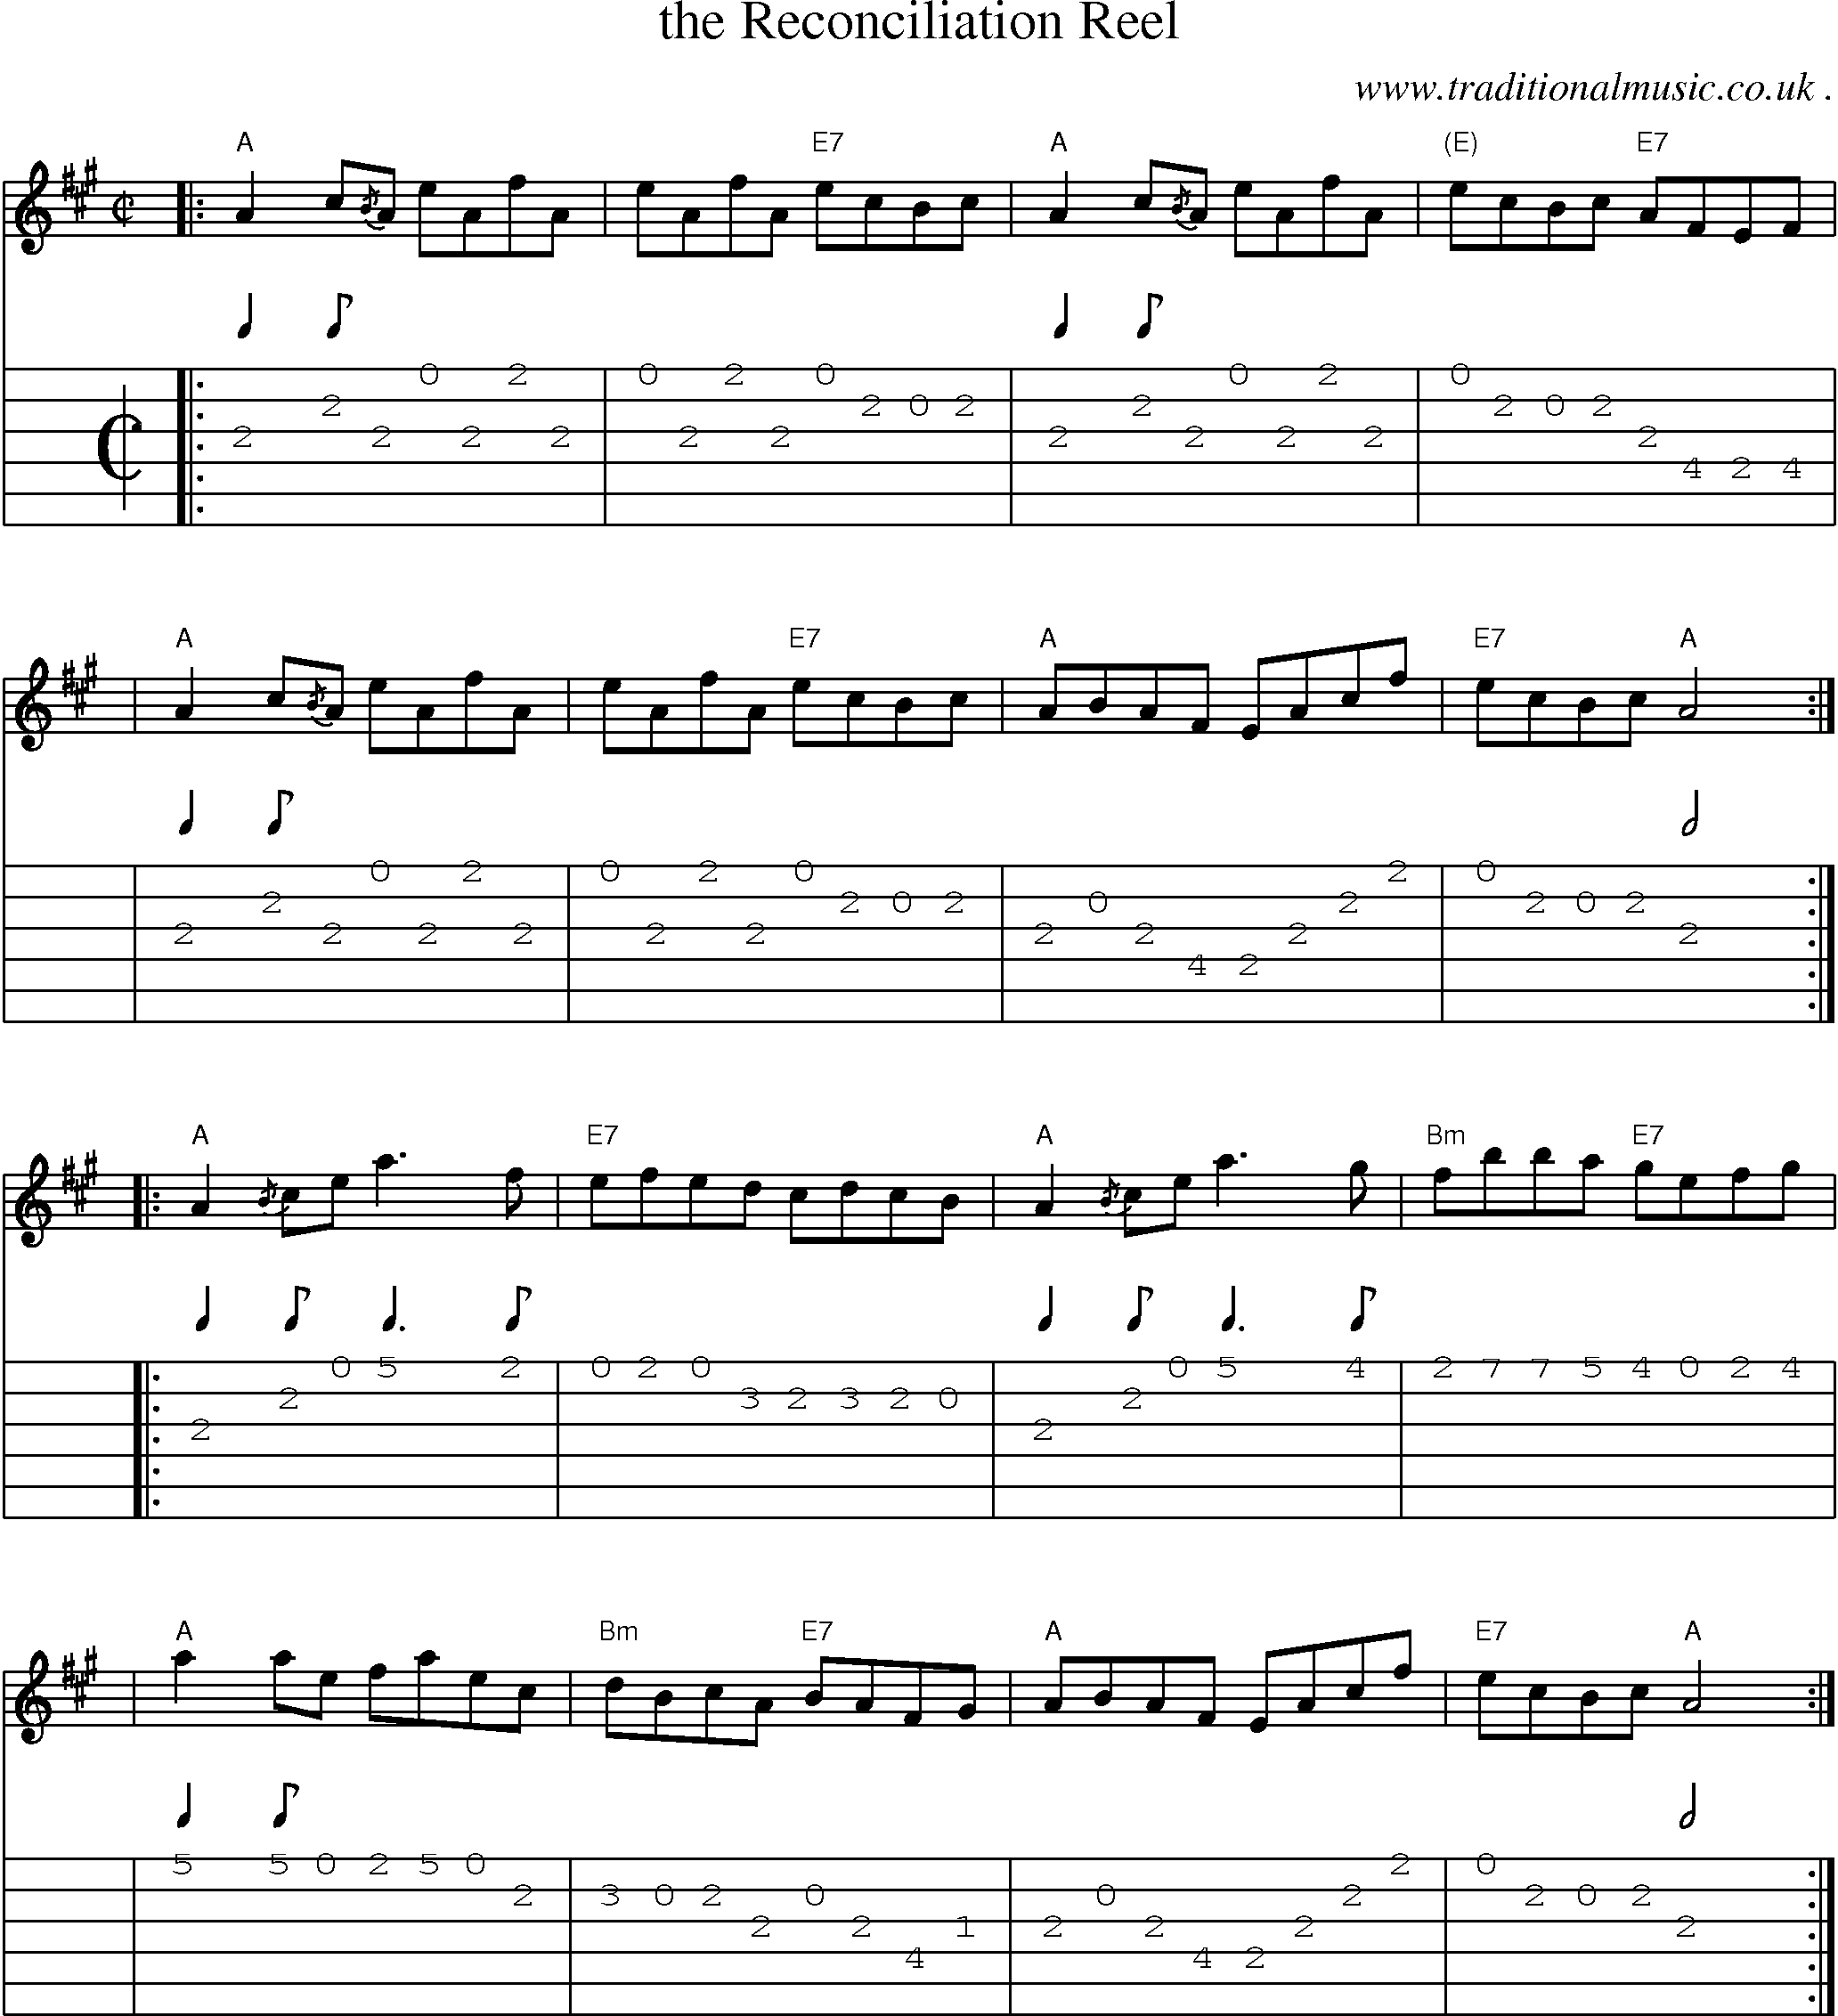 Sheet-music  score, Chords and Guitar Tabs for The Reconciliation Reel